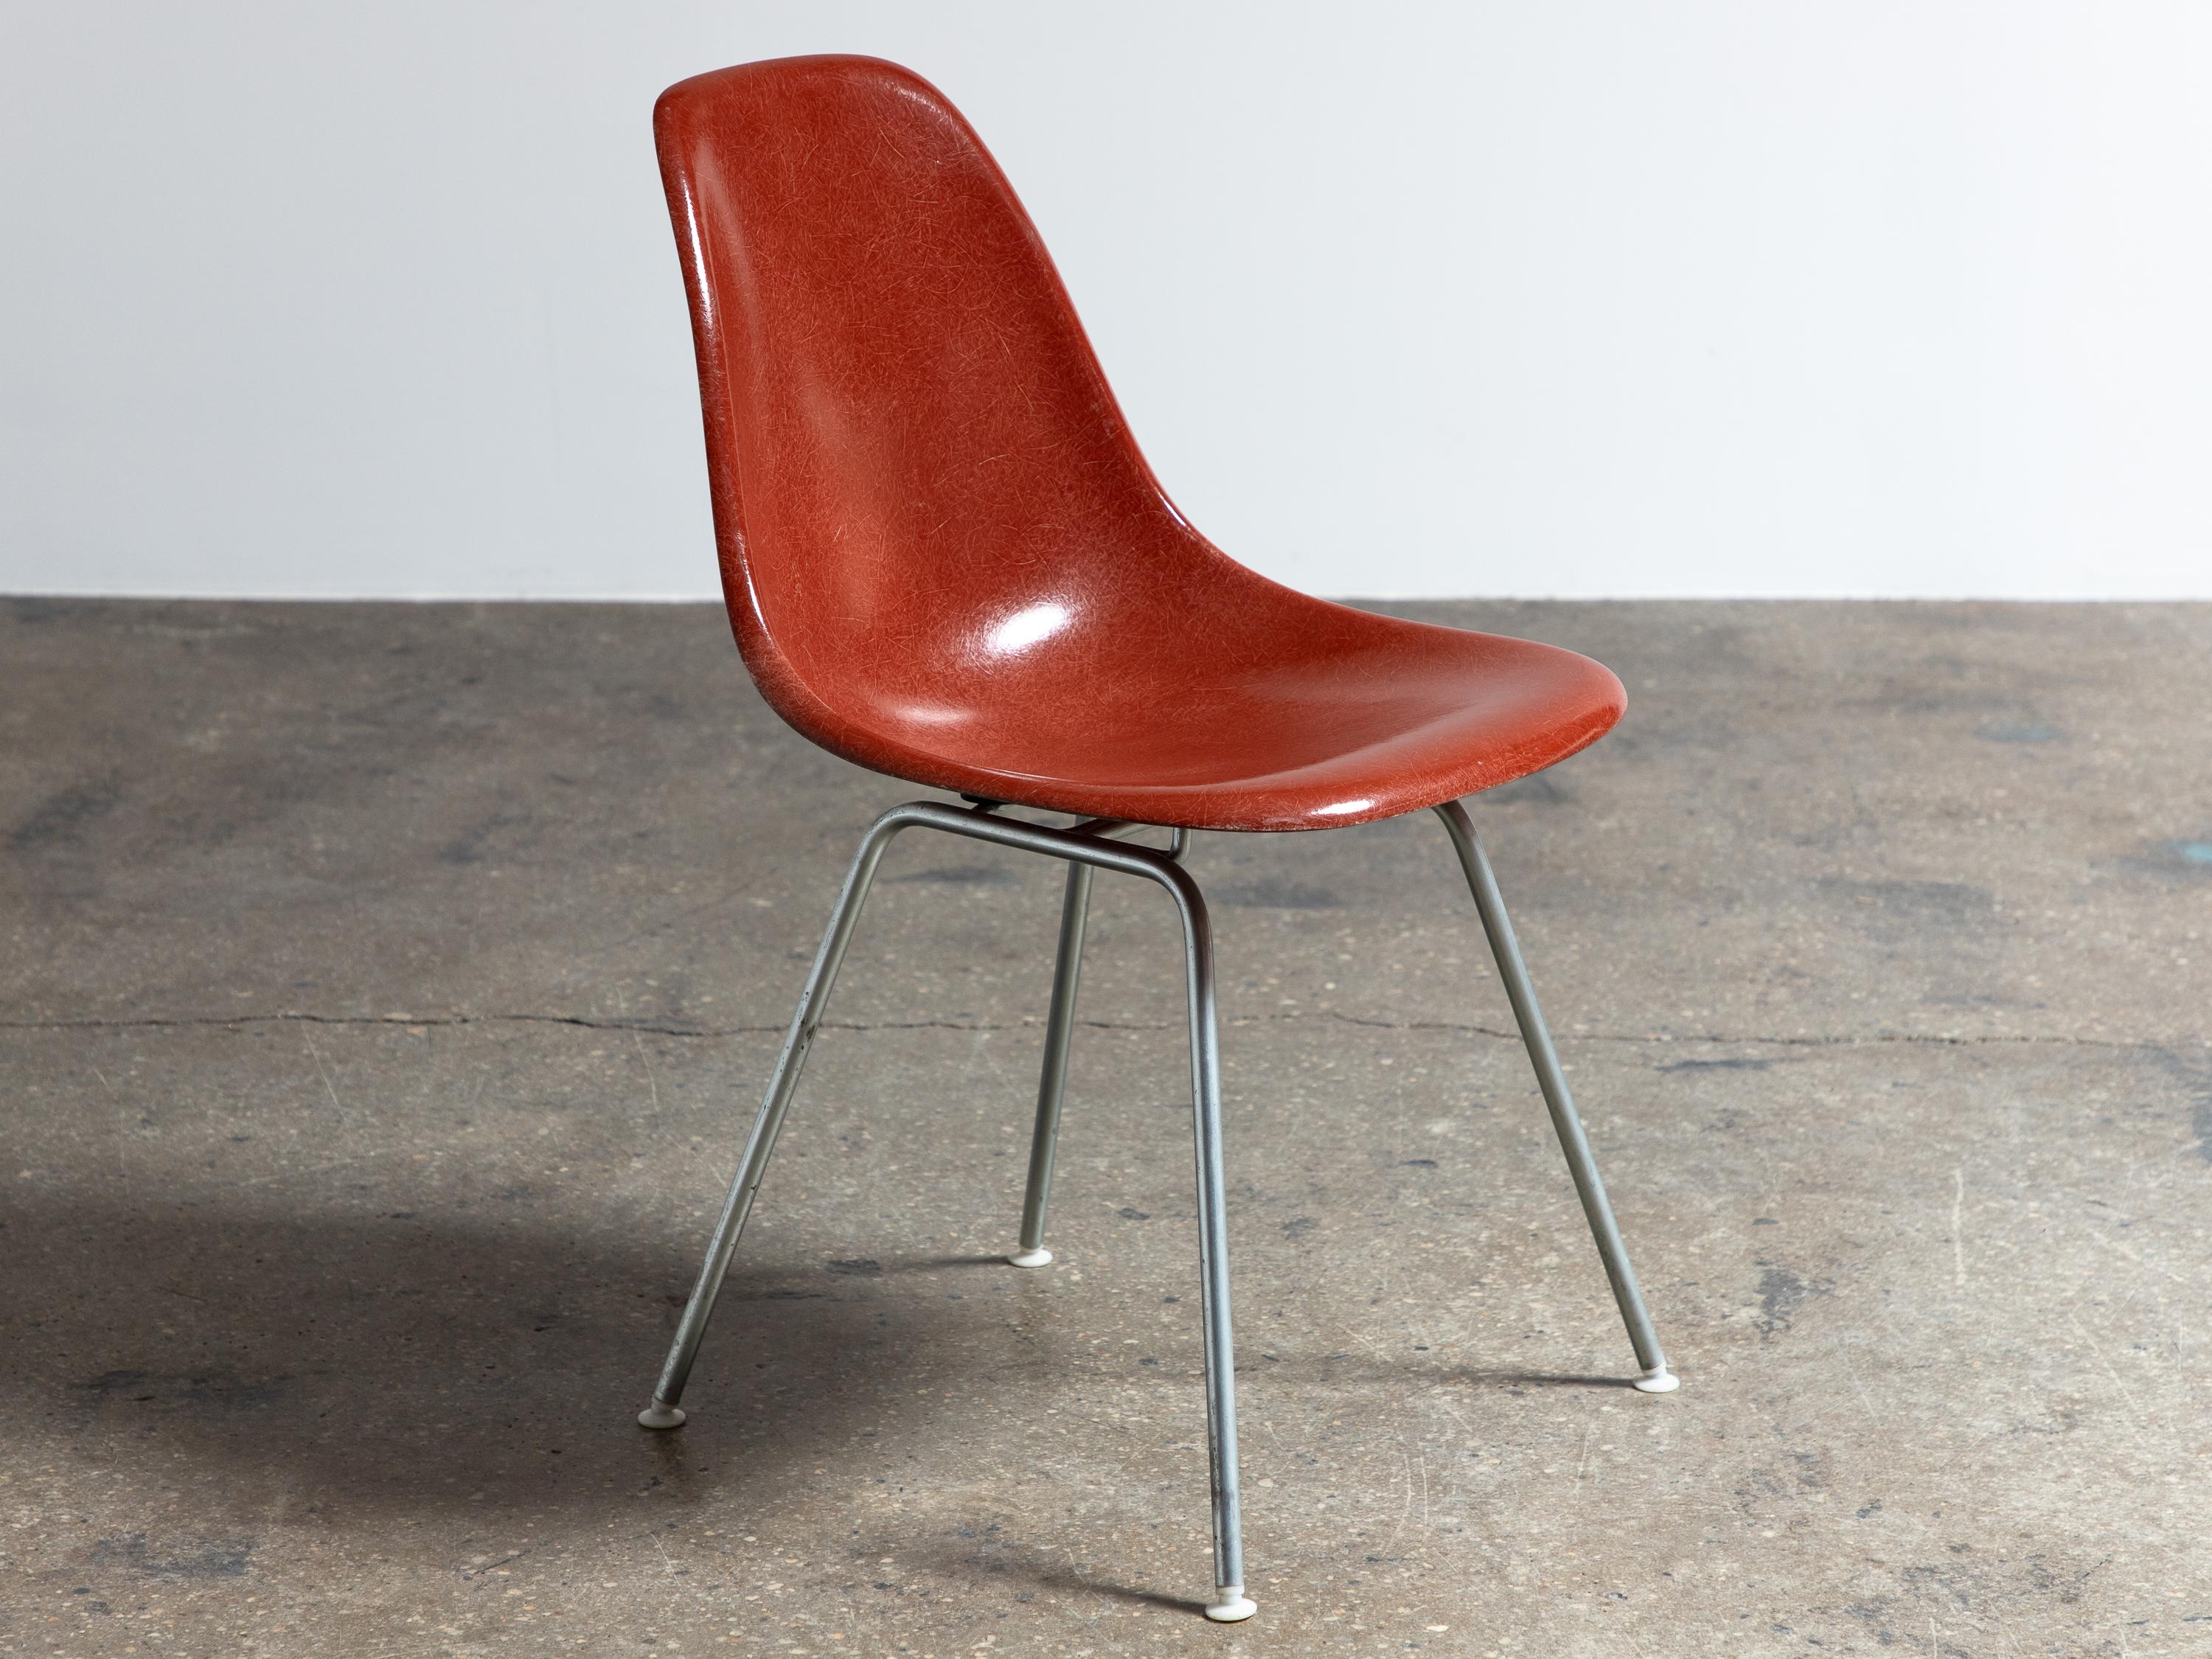 Multiple Available. Original Molded Fiberglass Shell Chair, designed by Charles and Ray Eames for Herman Miller. Vintage shell chairs are prized for their attractive patina, distinct thread texture and beautiful depth of color seen in the fiberglass